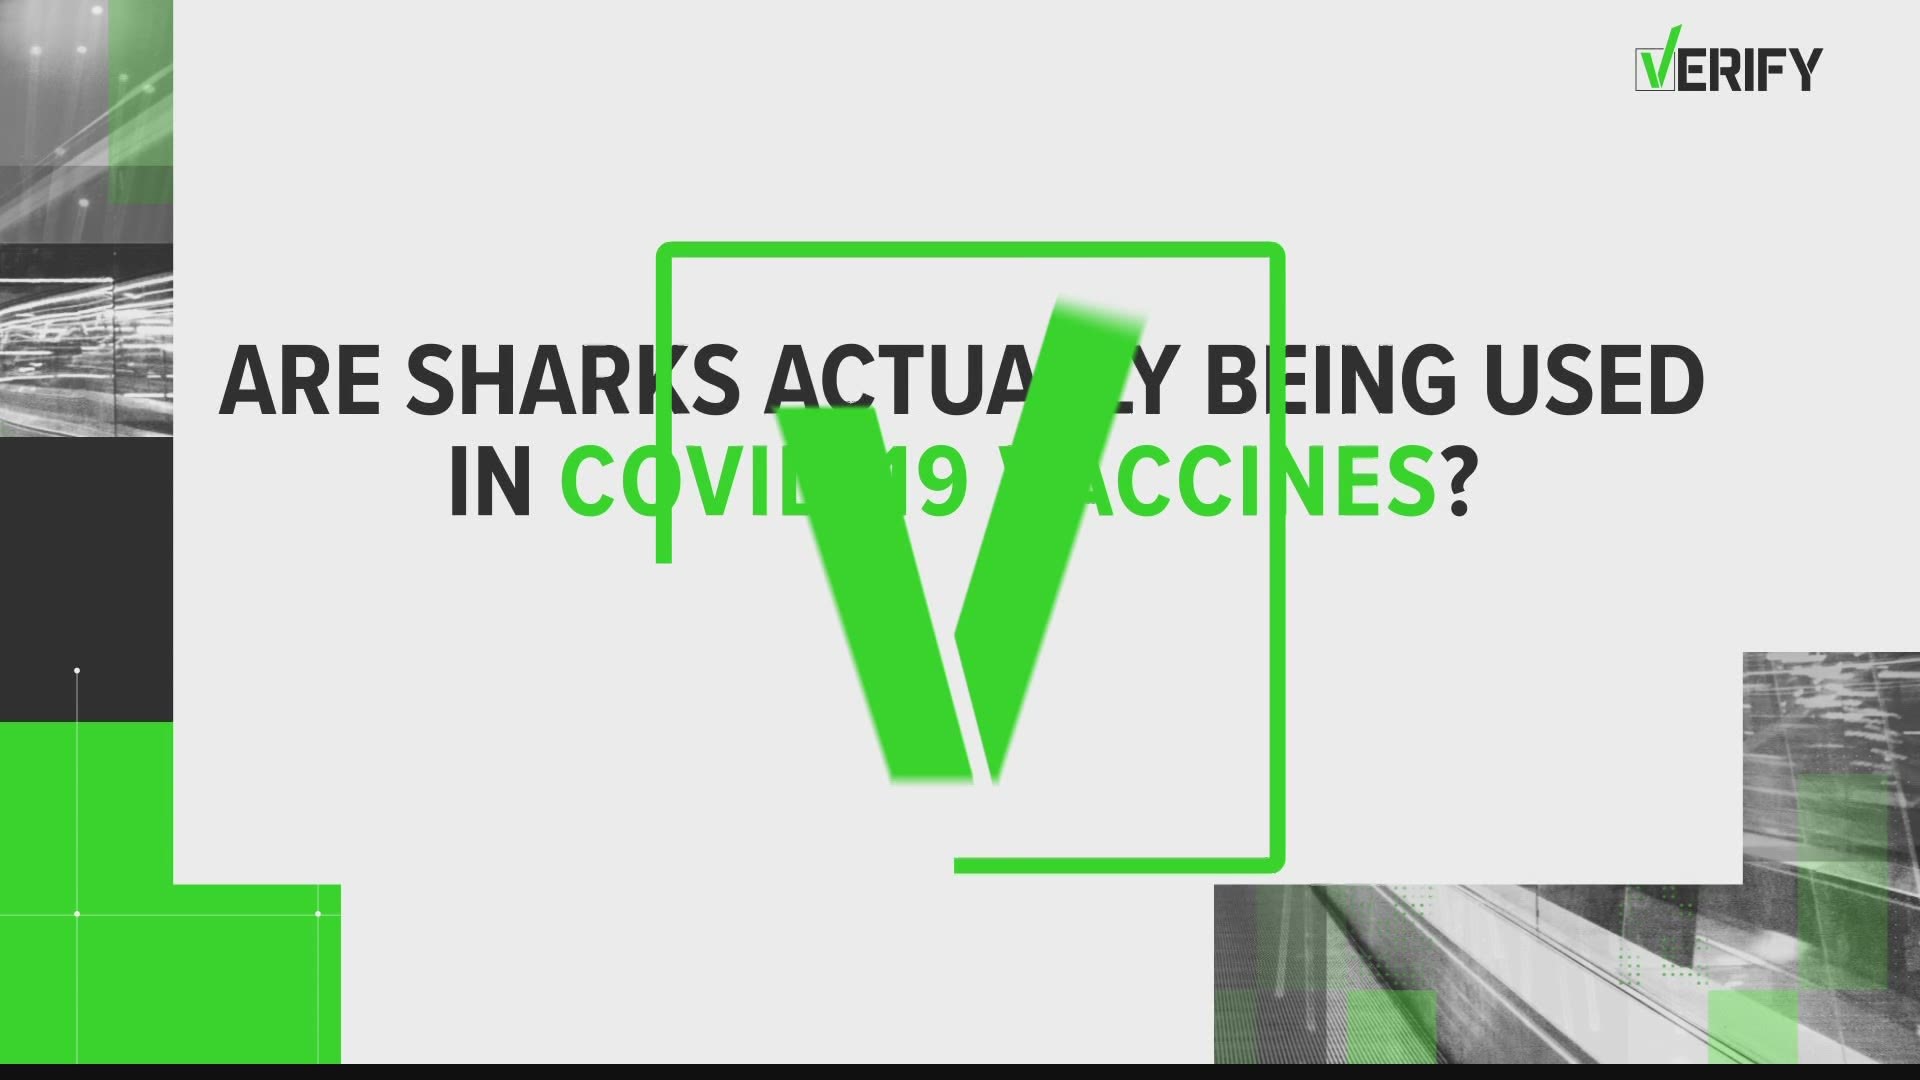 Our VERIFY team is getting answers to your questions about the COVID-19 vaccine.